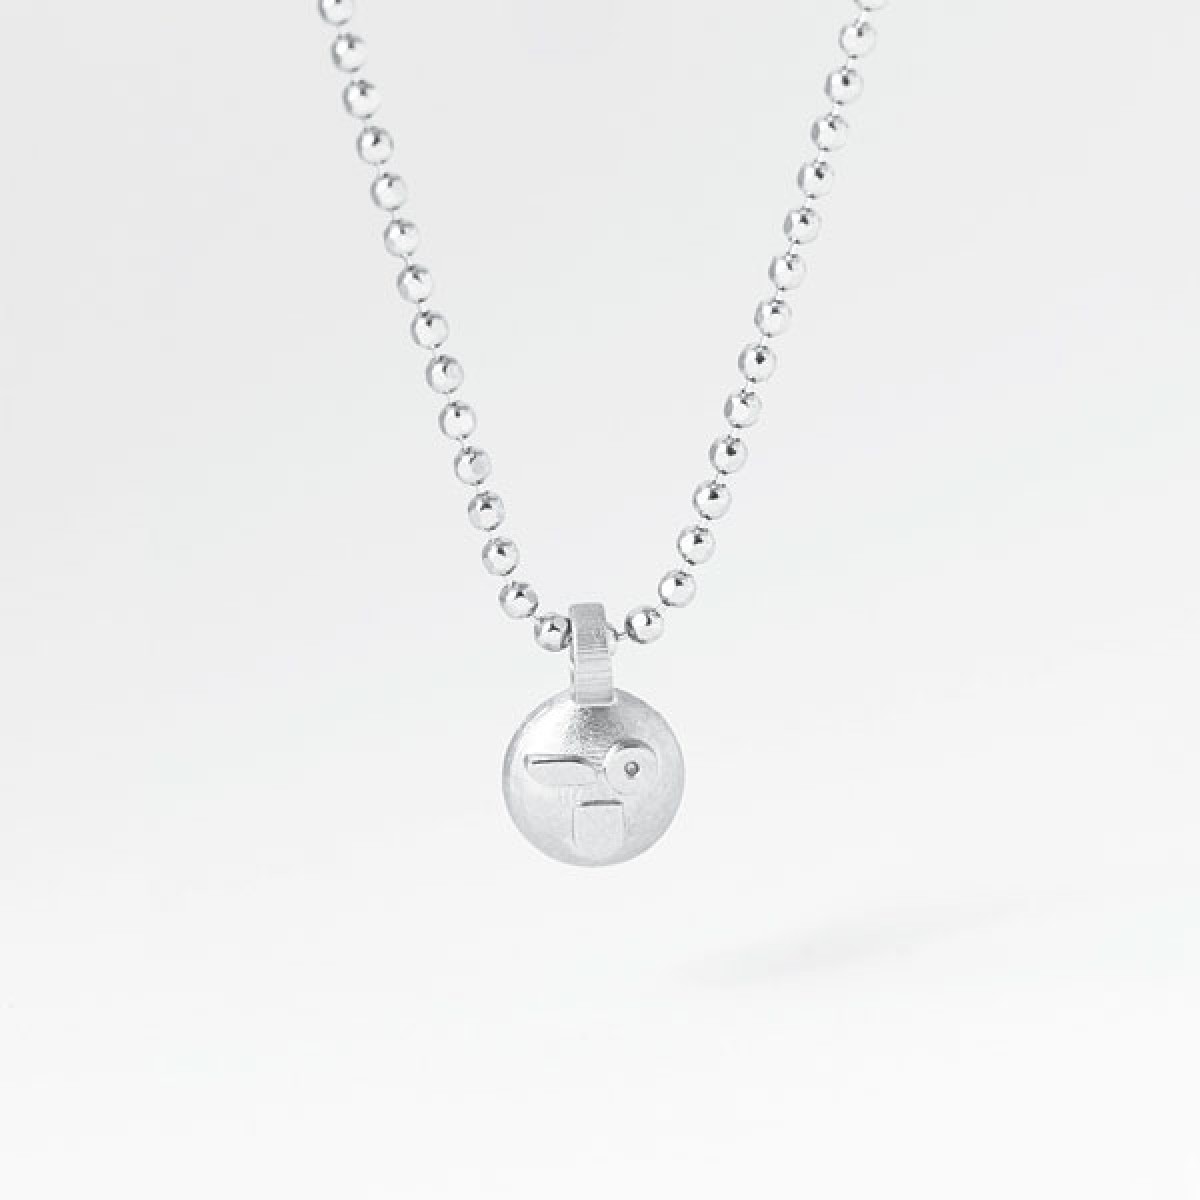 related by objects - vibe necklace - nevermind - 925 Sterlingsilber - feinversilbert 